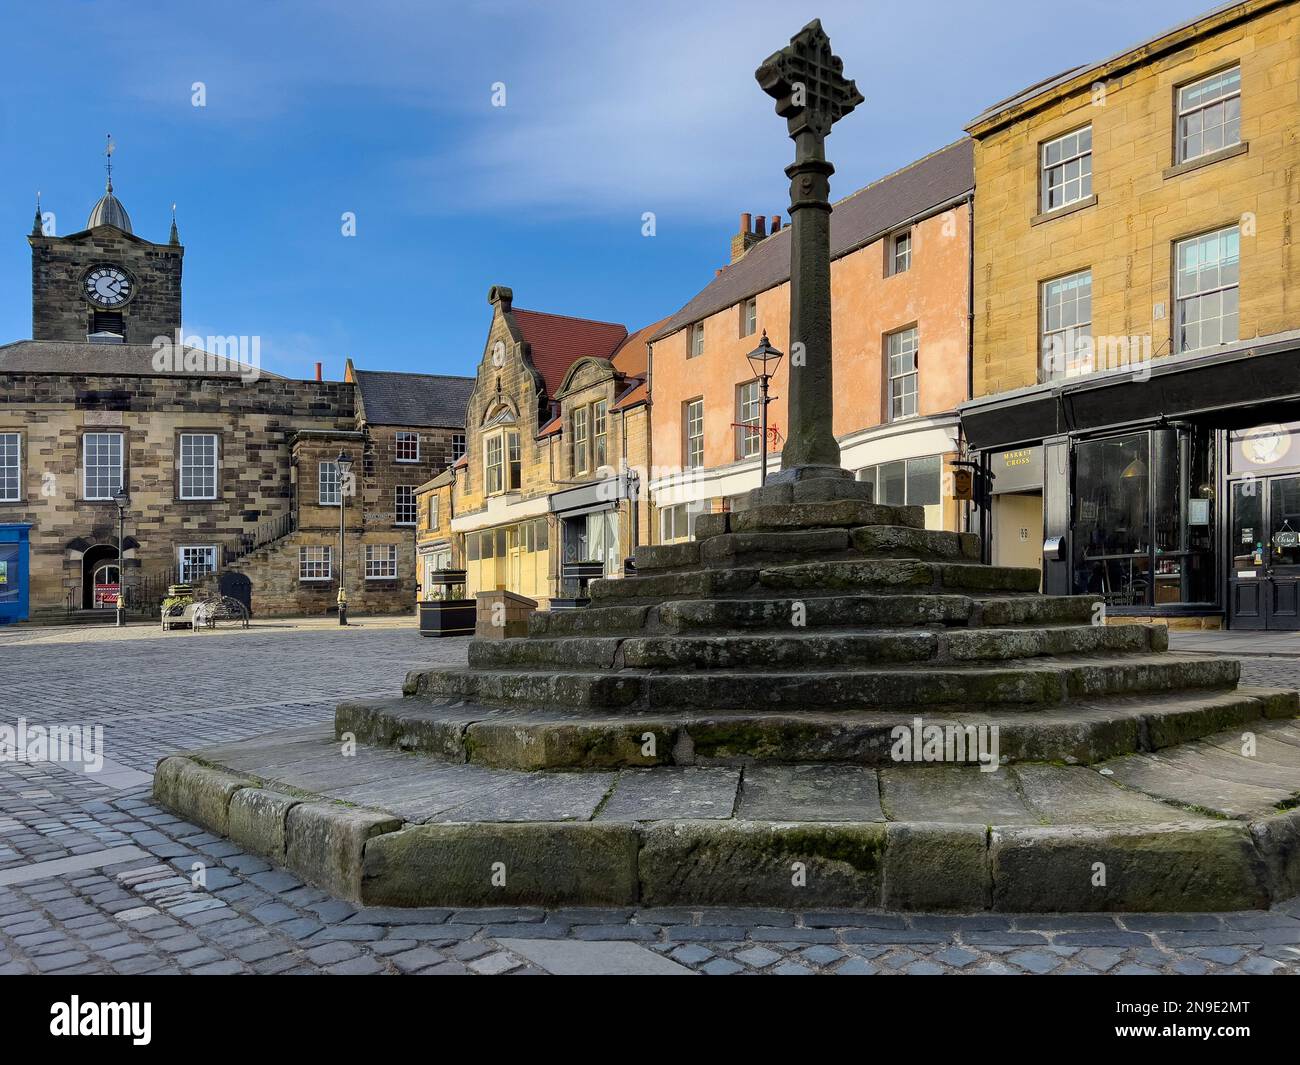 The main market square in the town of Alnwick in Northumberland in northeast England. Stock Photo